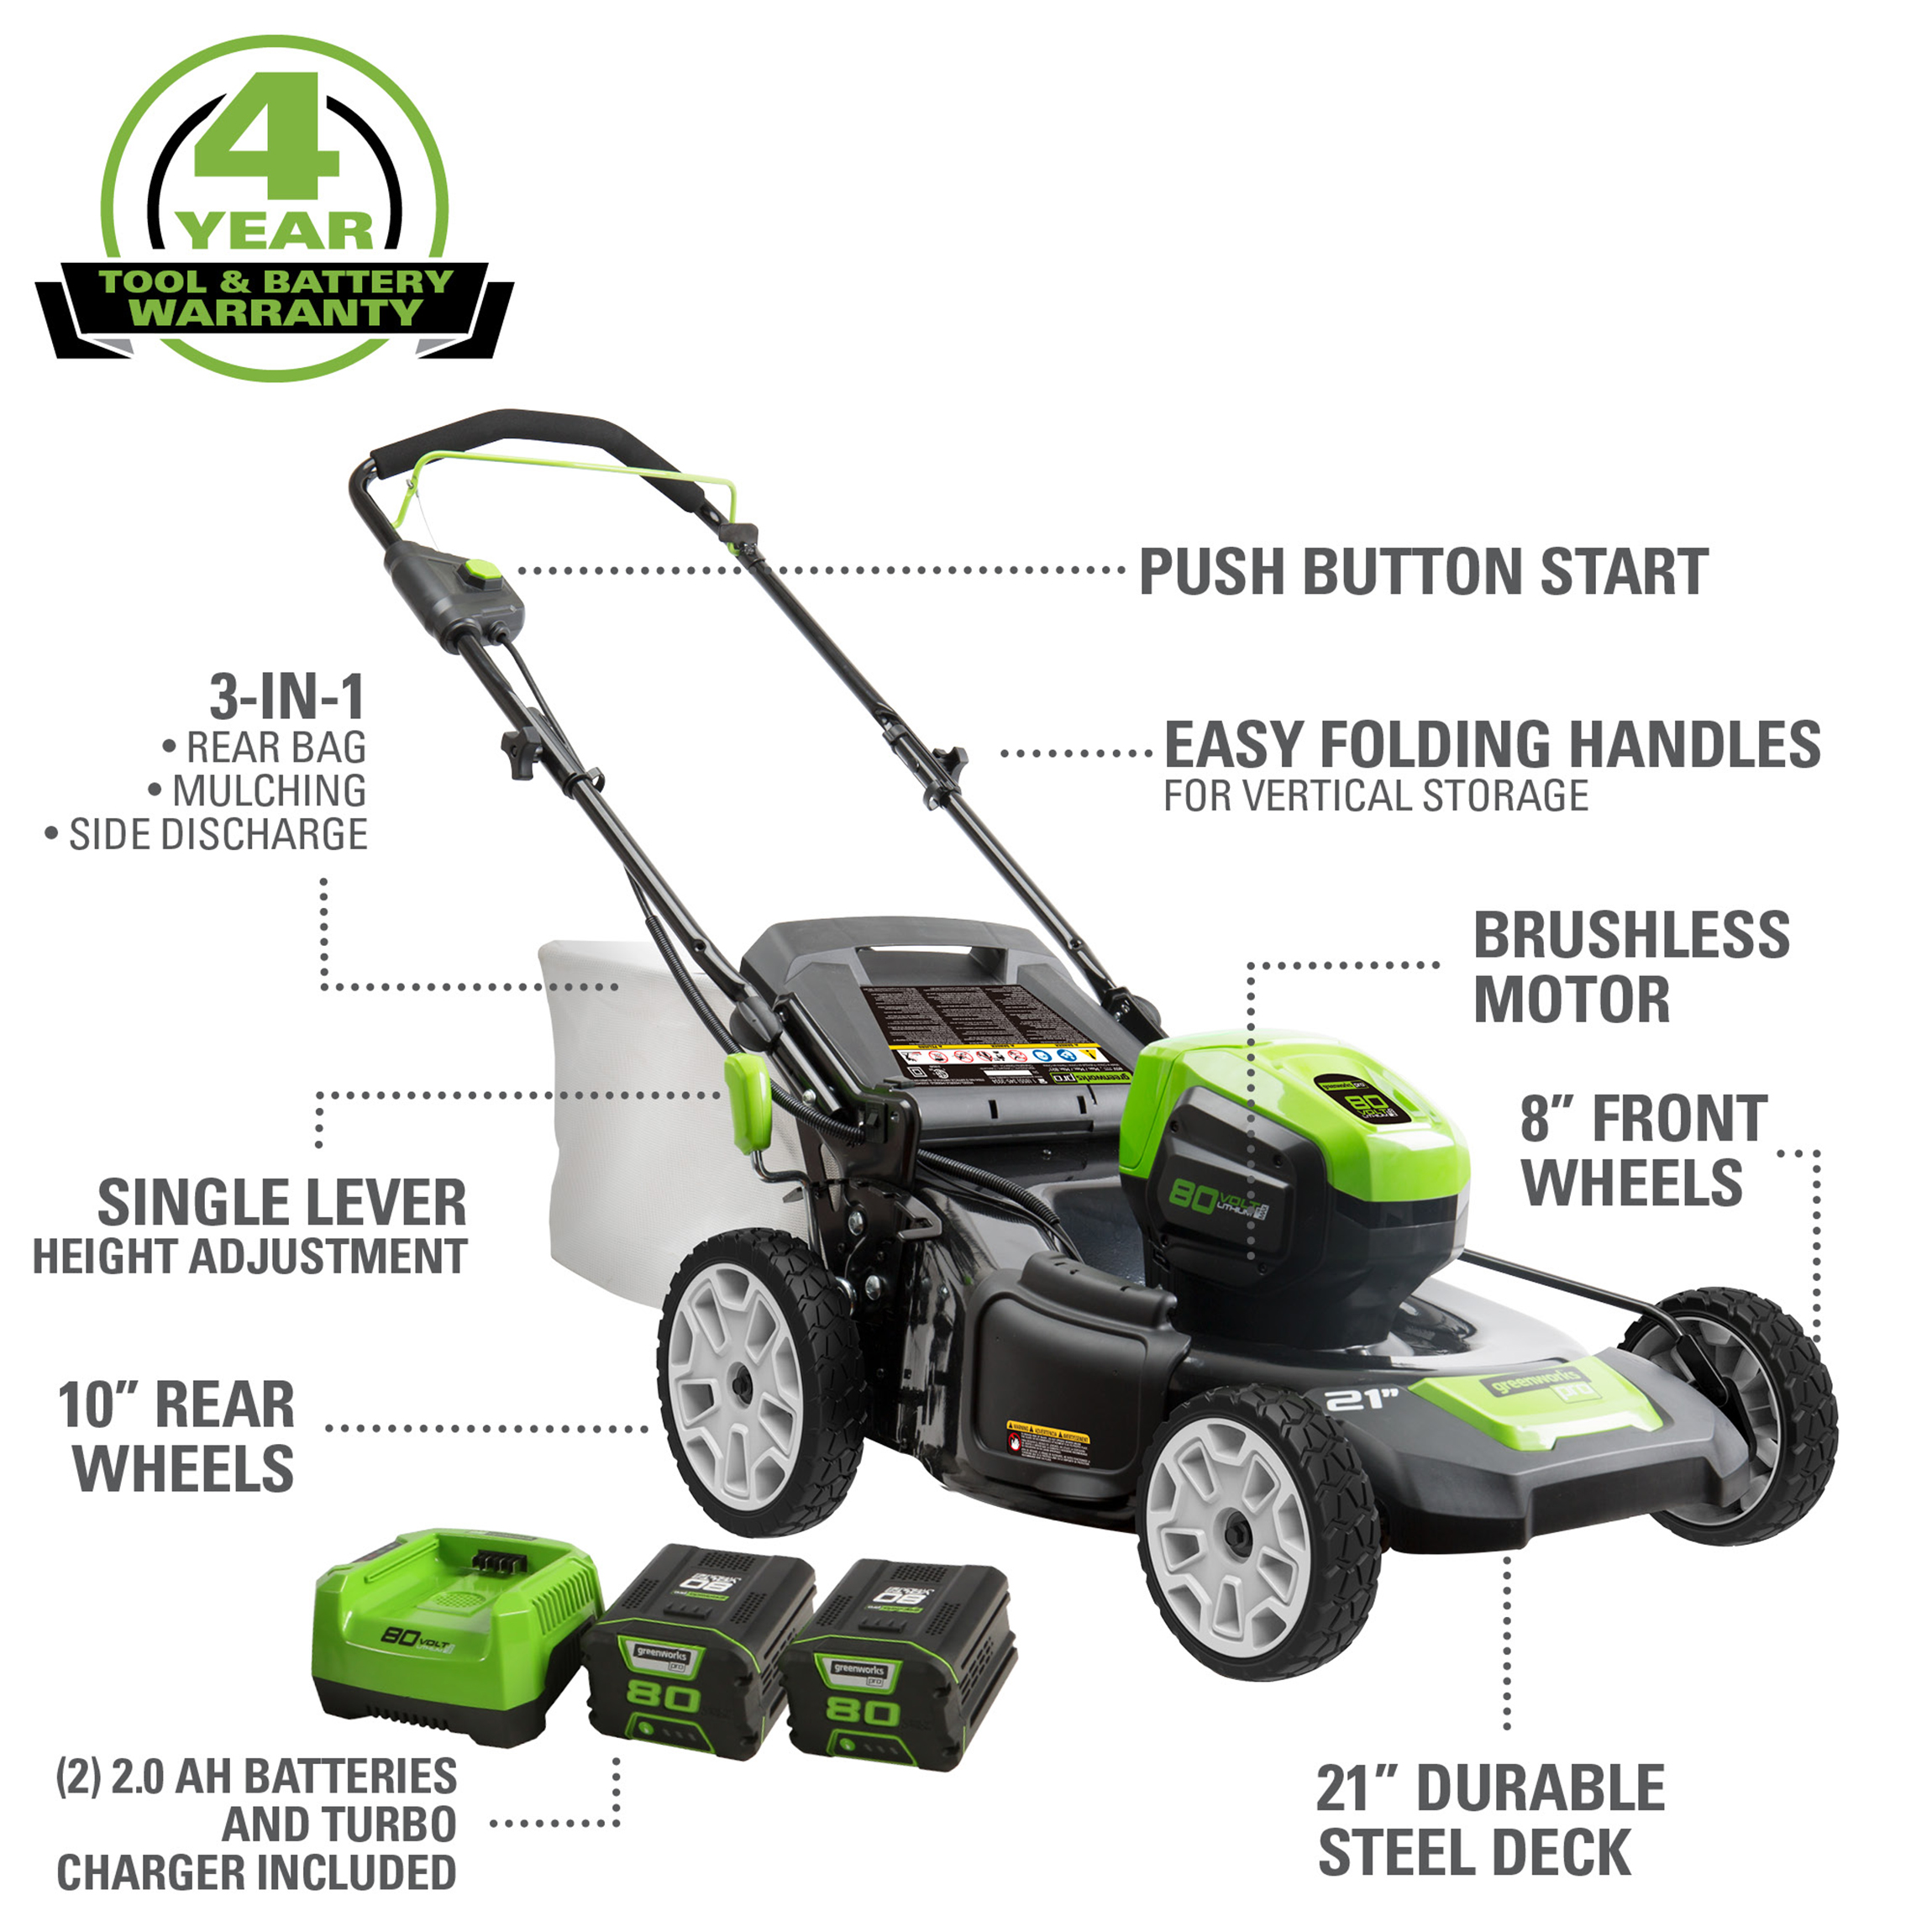 Greenworks 80V 21" Battery Powered Push Mower + (2) 2.0Ah Batteries & Rapid Charger - image 3 of 16